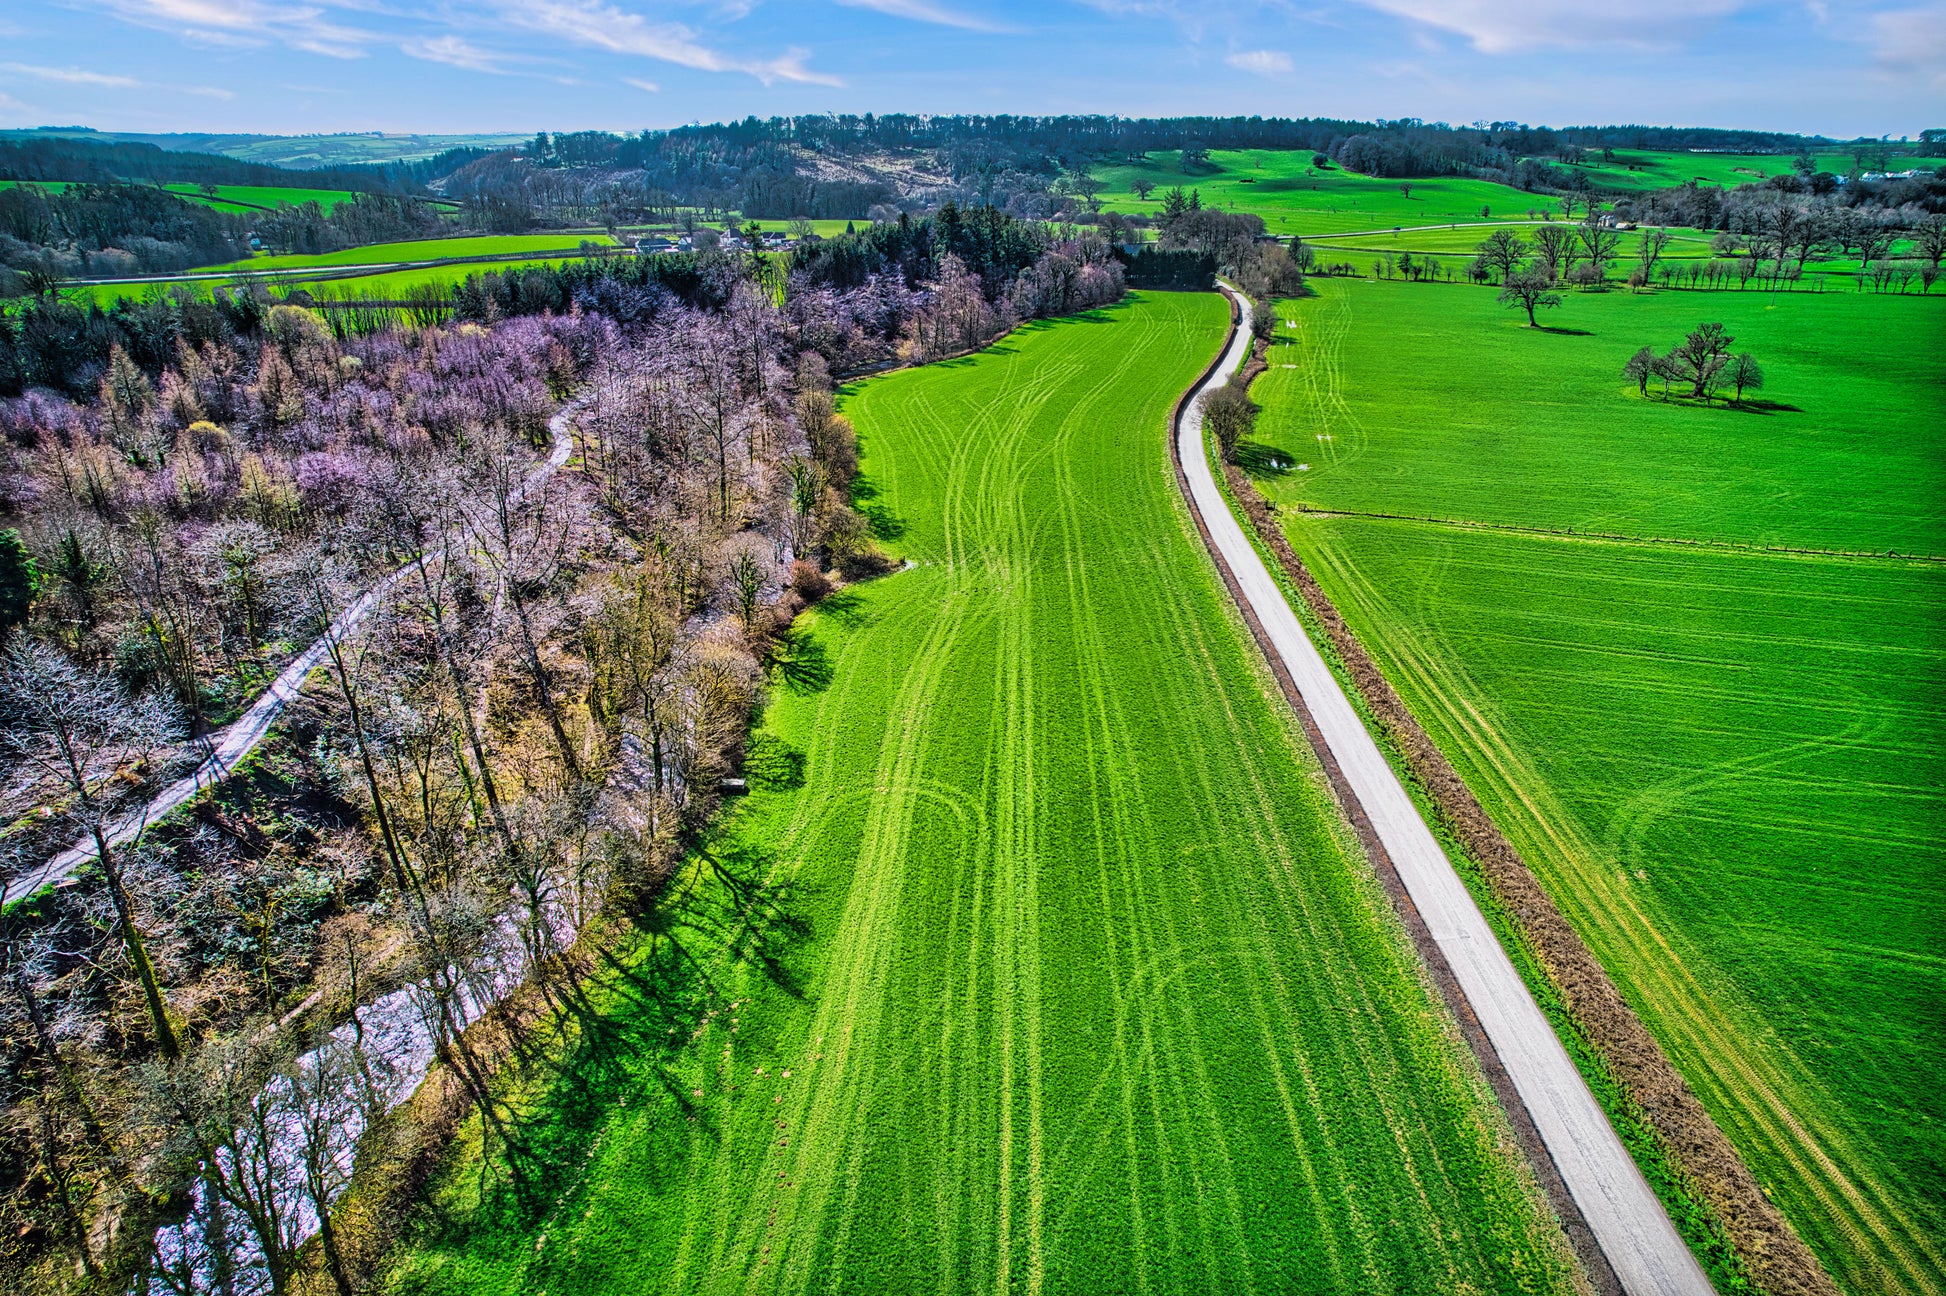 River Bray - The Long Road Photo - DJI_0148- Photographer Martin Fisher- Picture The Image